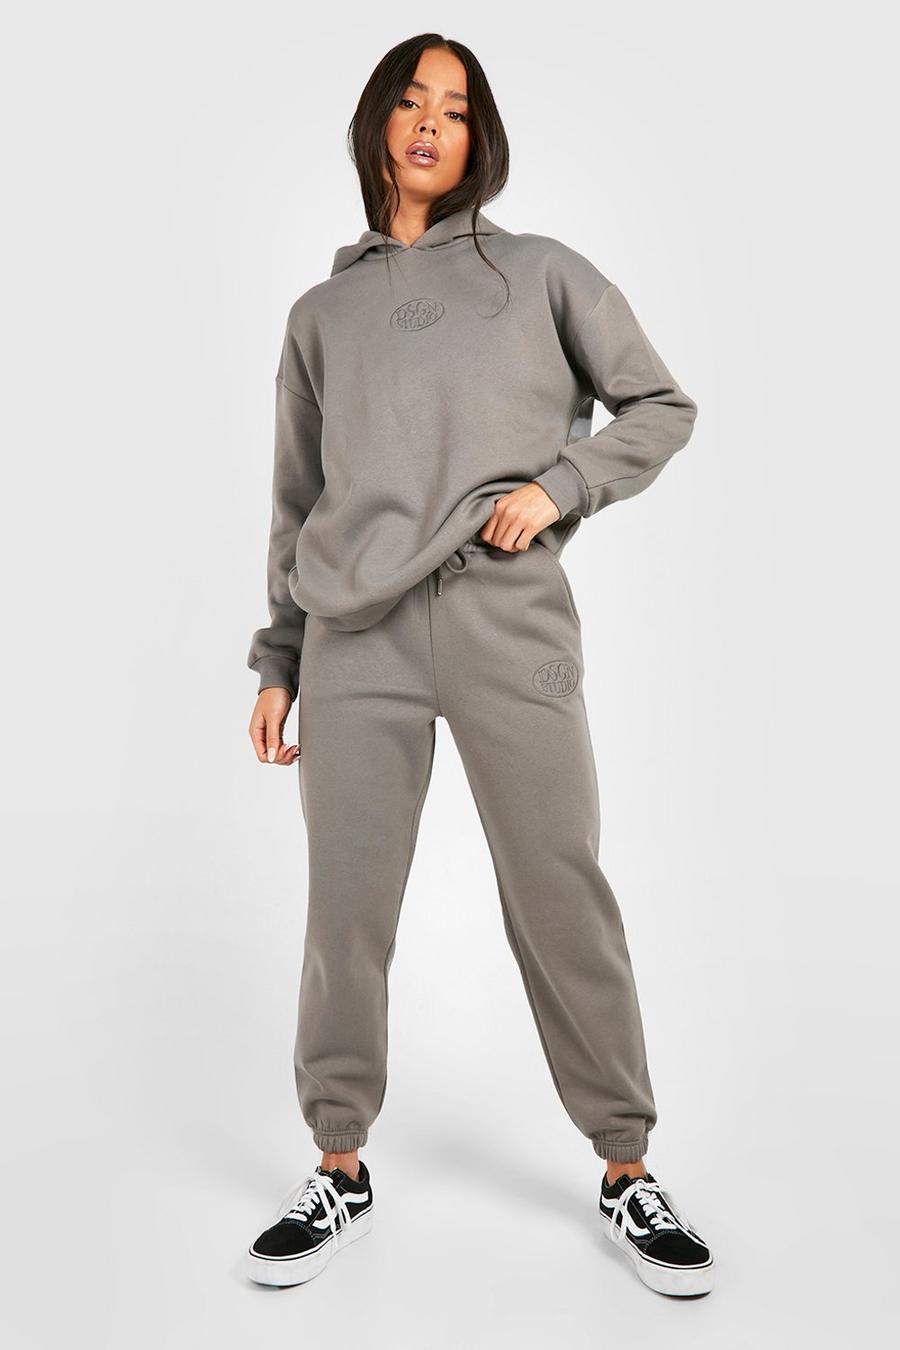 Charcoal grey Petite Embroidery Dsgn Hoody & Jogger Tracksuit